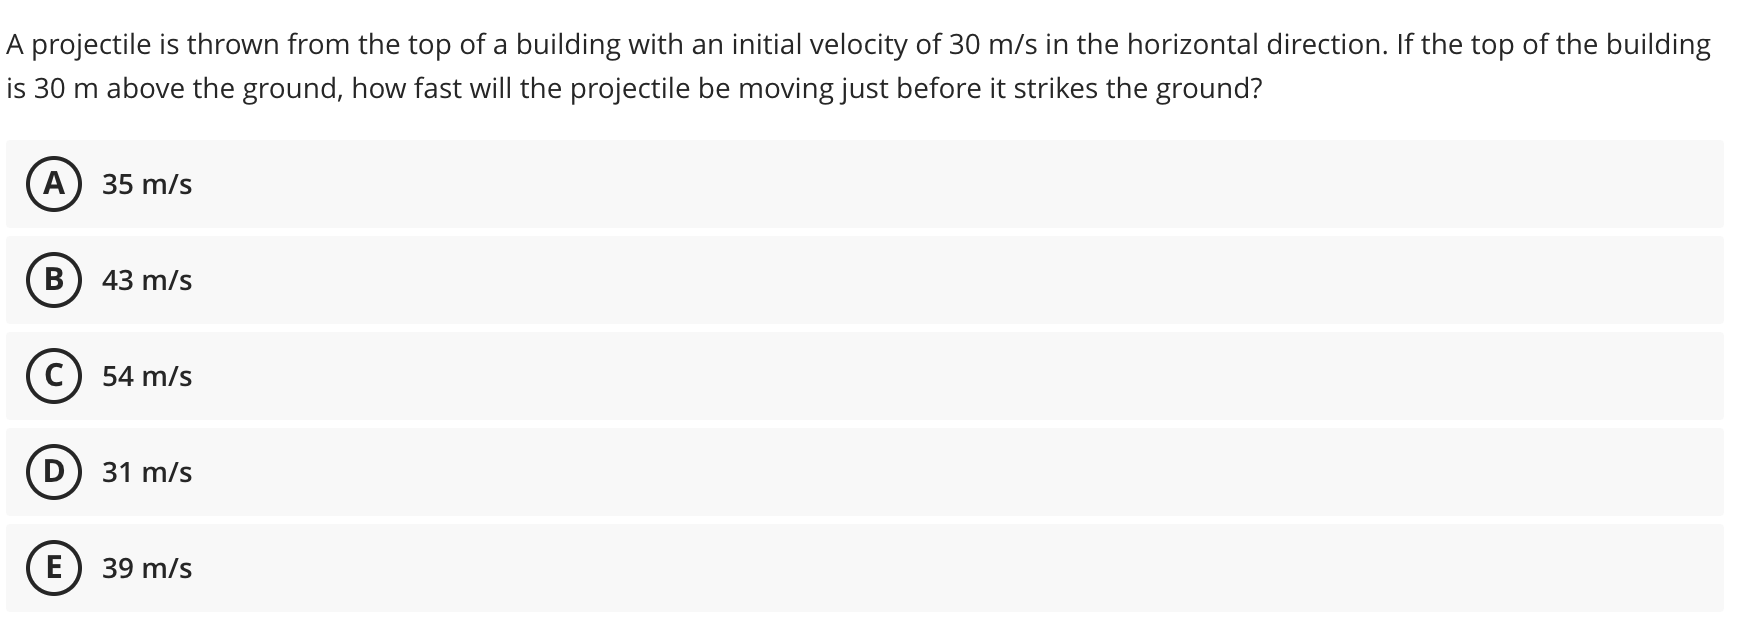 A projectile is thrown from the top of a building with an initial velocity of 30 m/s in the horizontal direction. If the top of the building
s 30 m above the ground, how fast will the projectile be moving just before it strikes the ground?
